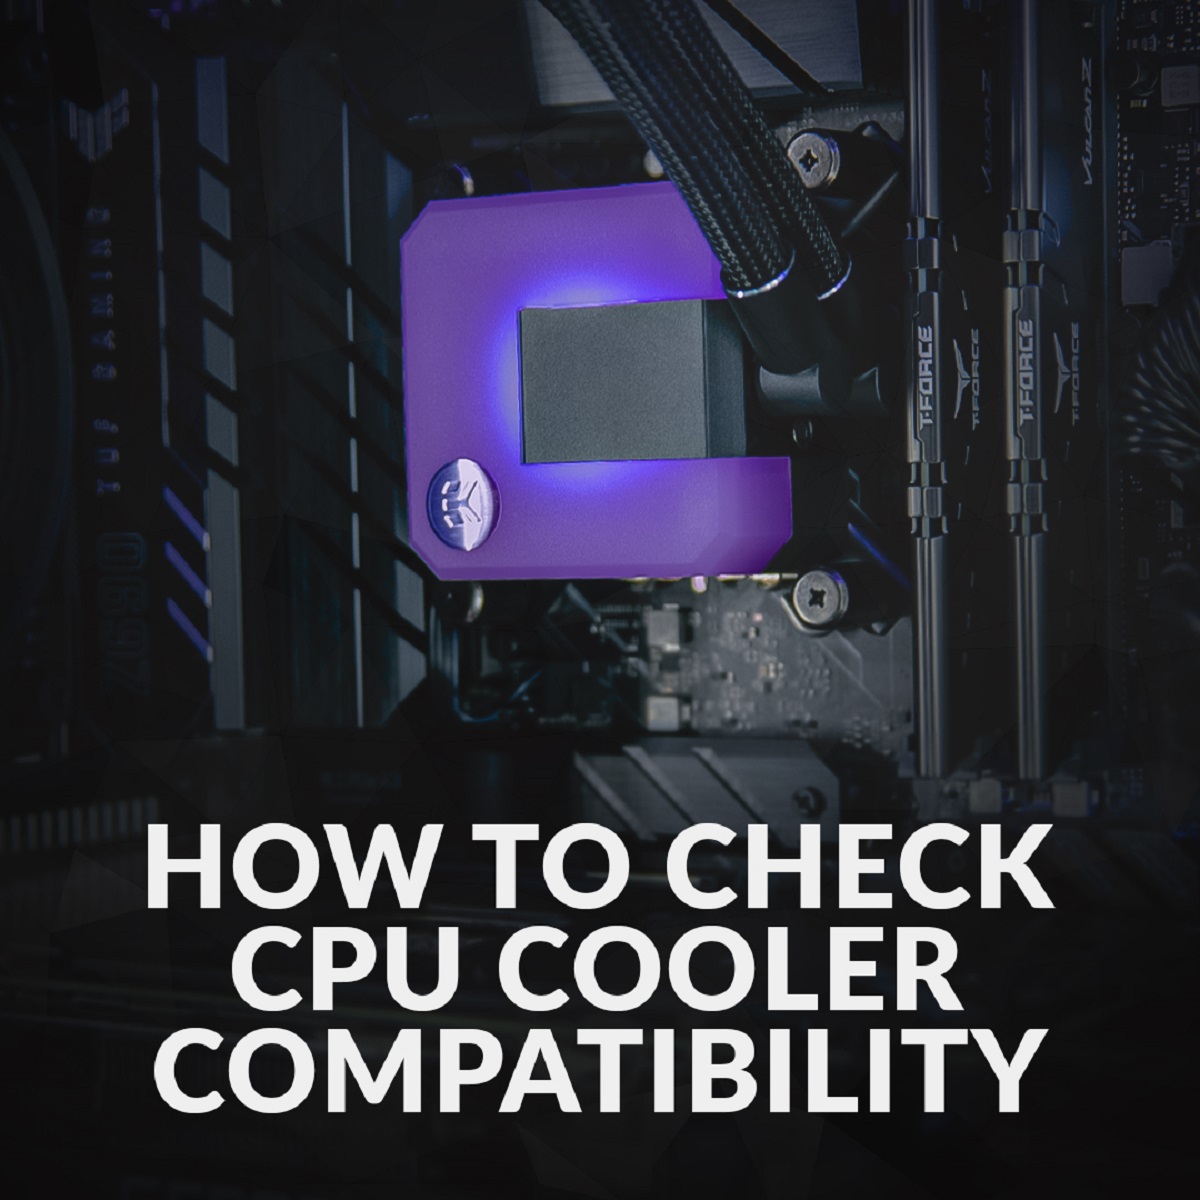 how-to-know-if-cpu-cooler-is-compatible-with-motherboard